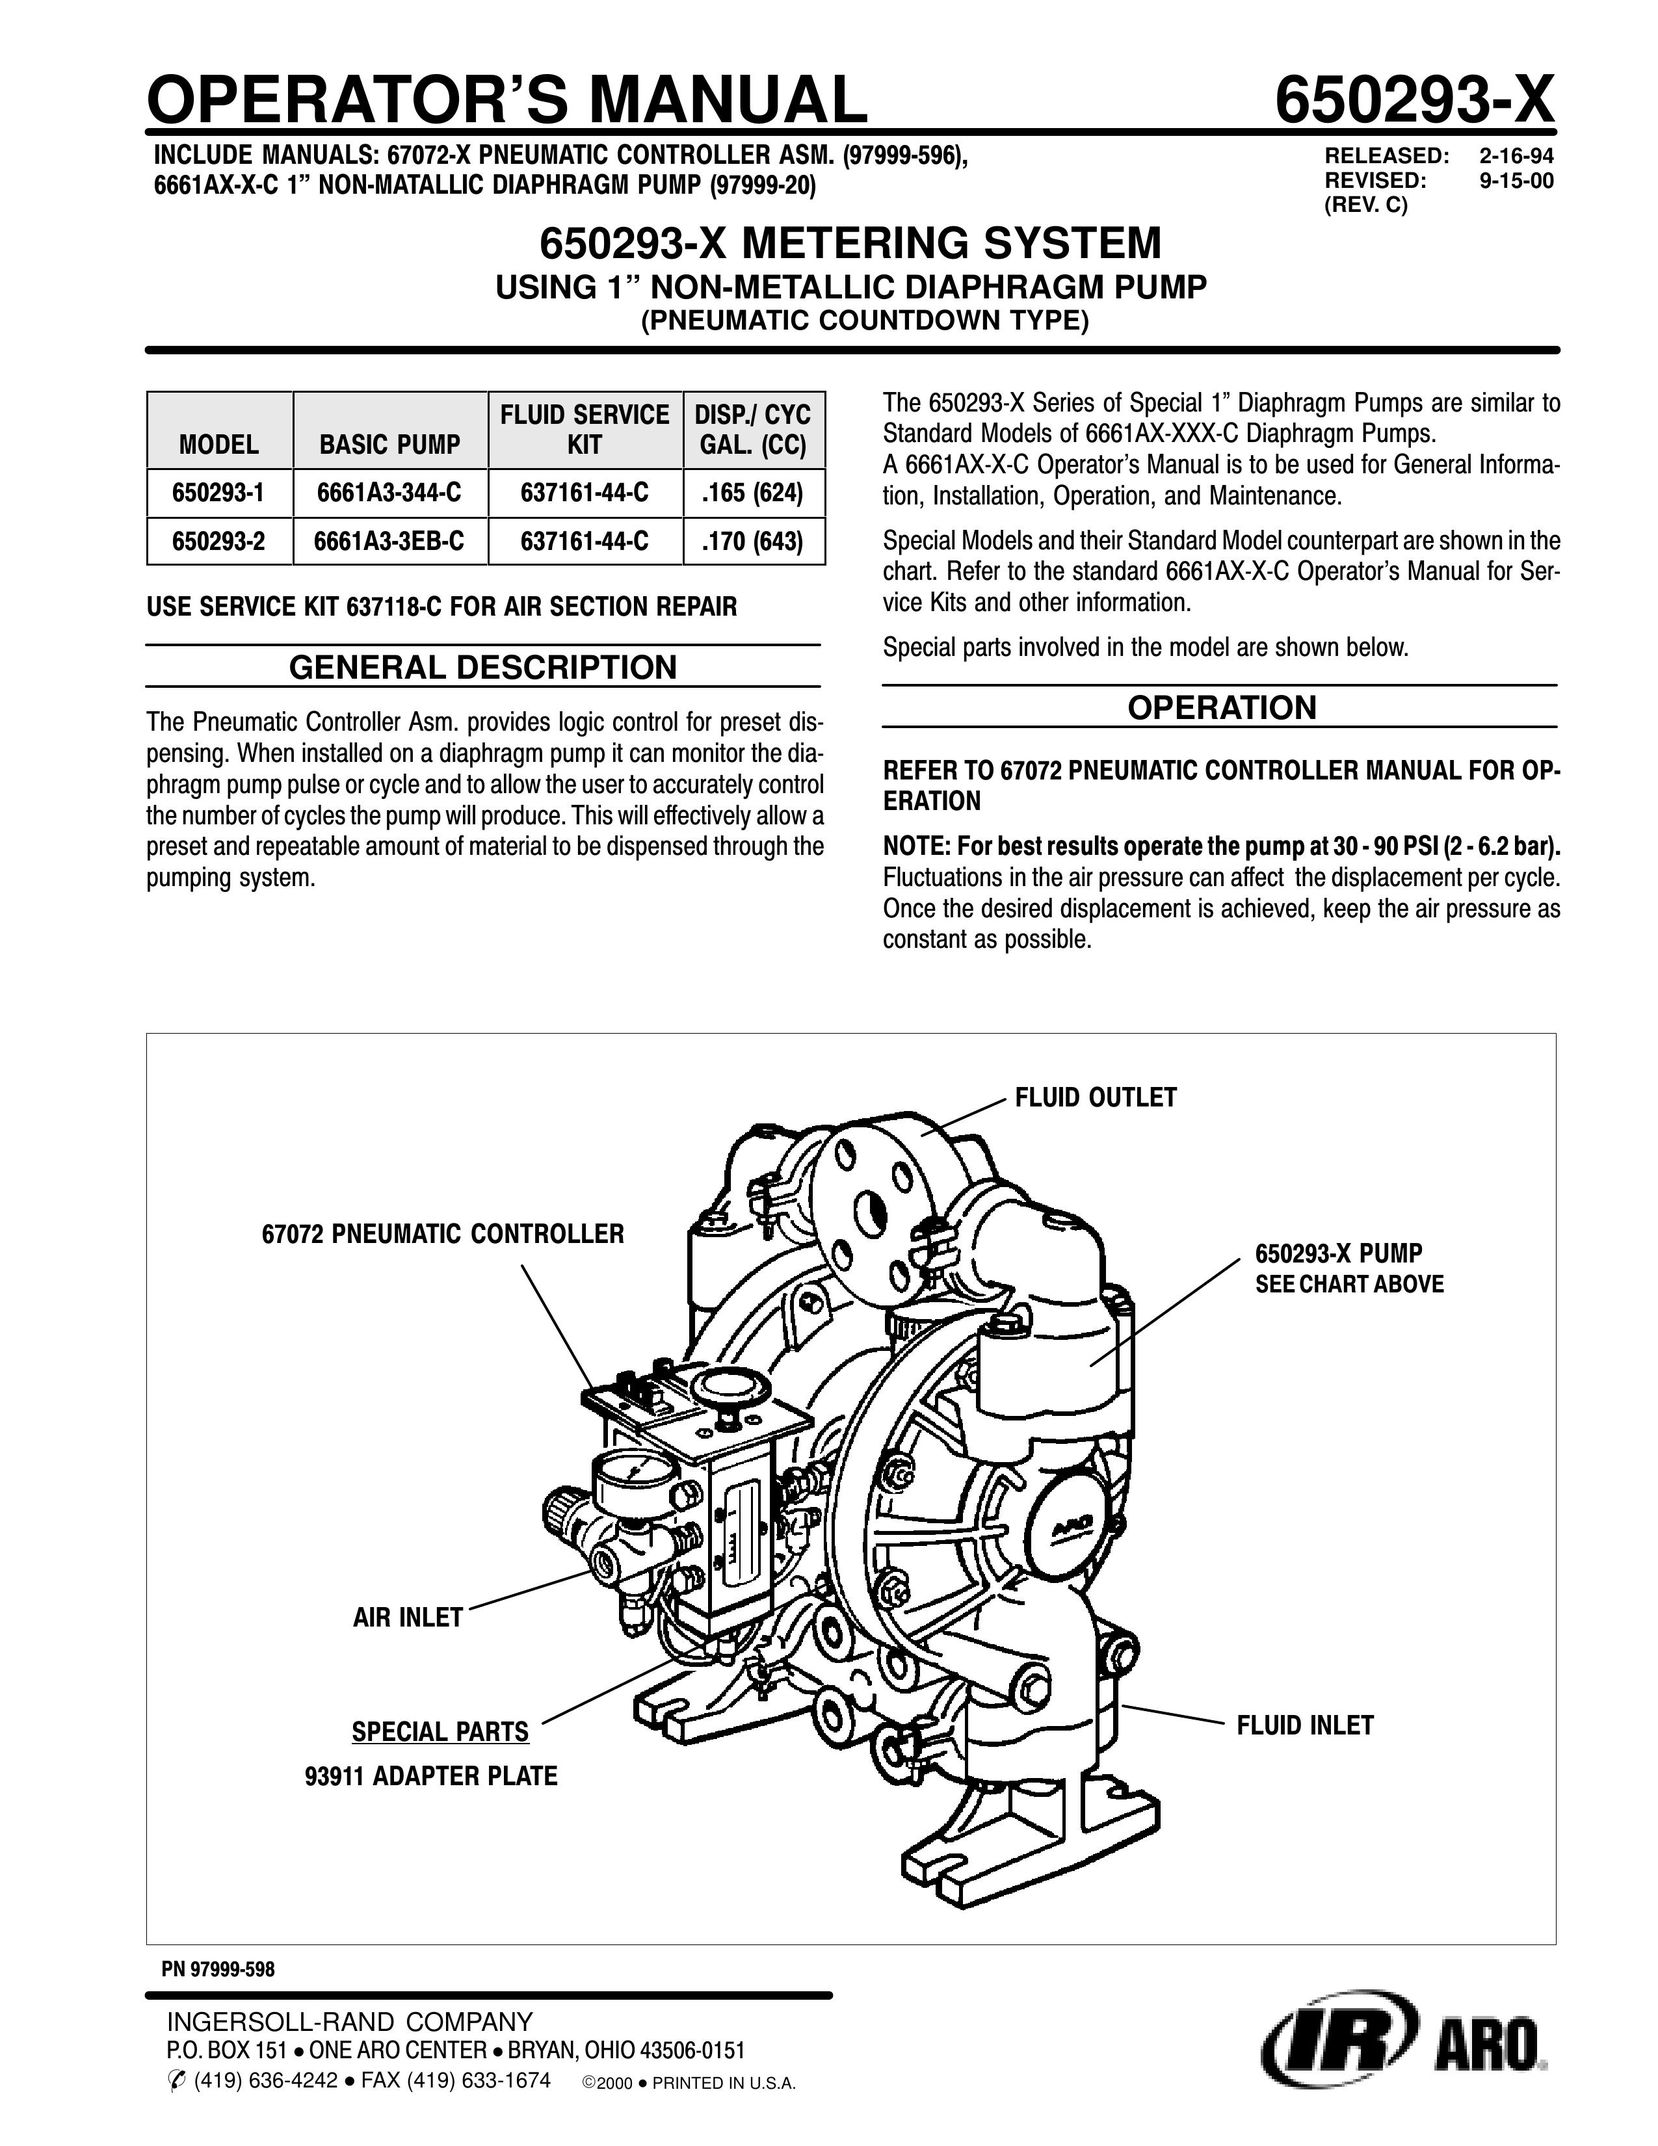 Ingersoll-Rand 650293-x Baby Furniture User Manual (Page 1)